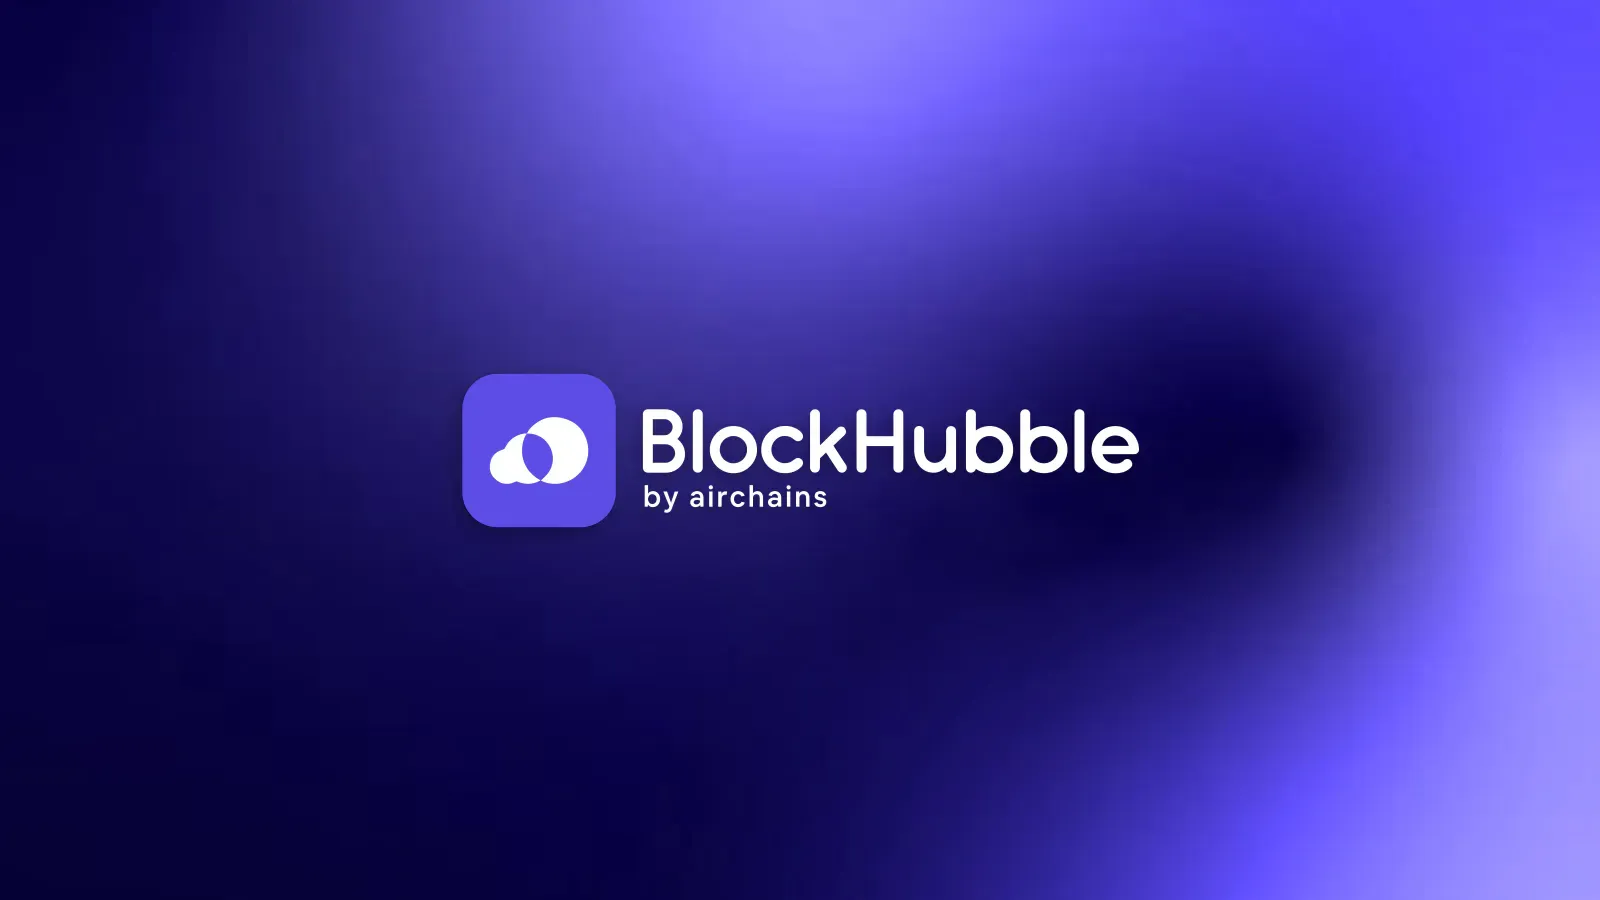 Airchains BlockHubble: Navigating The Path To Blockchain Discovery And Exploration